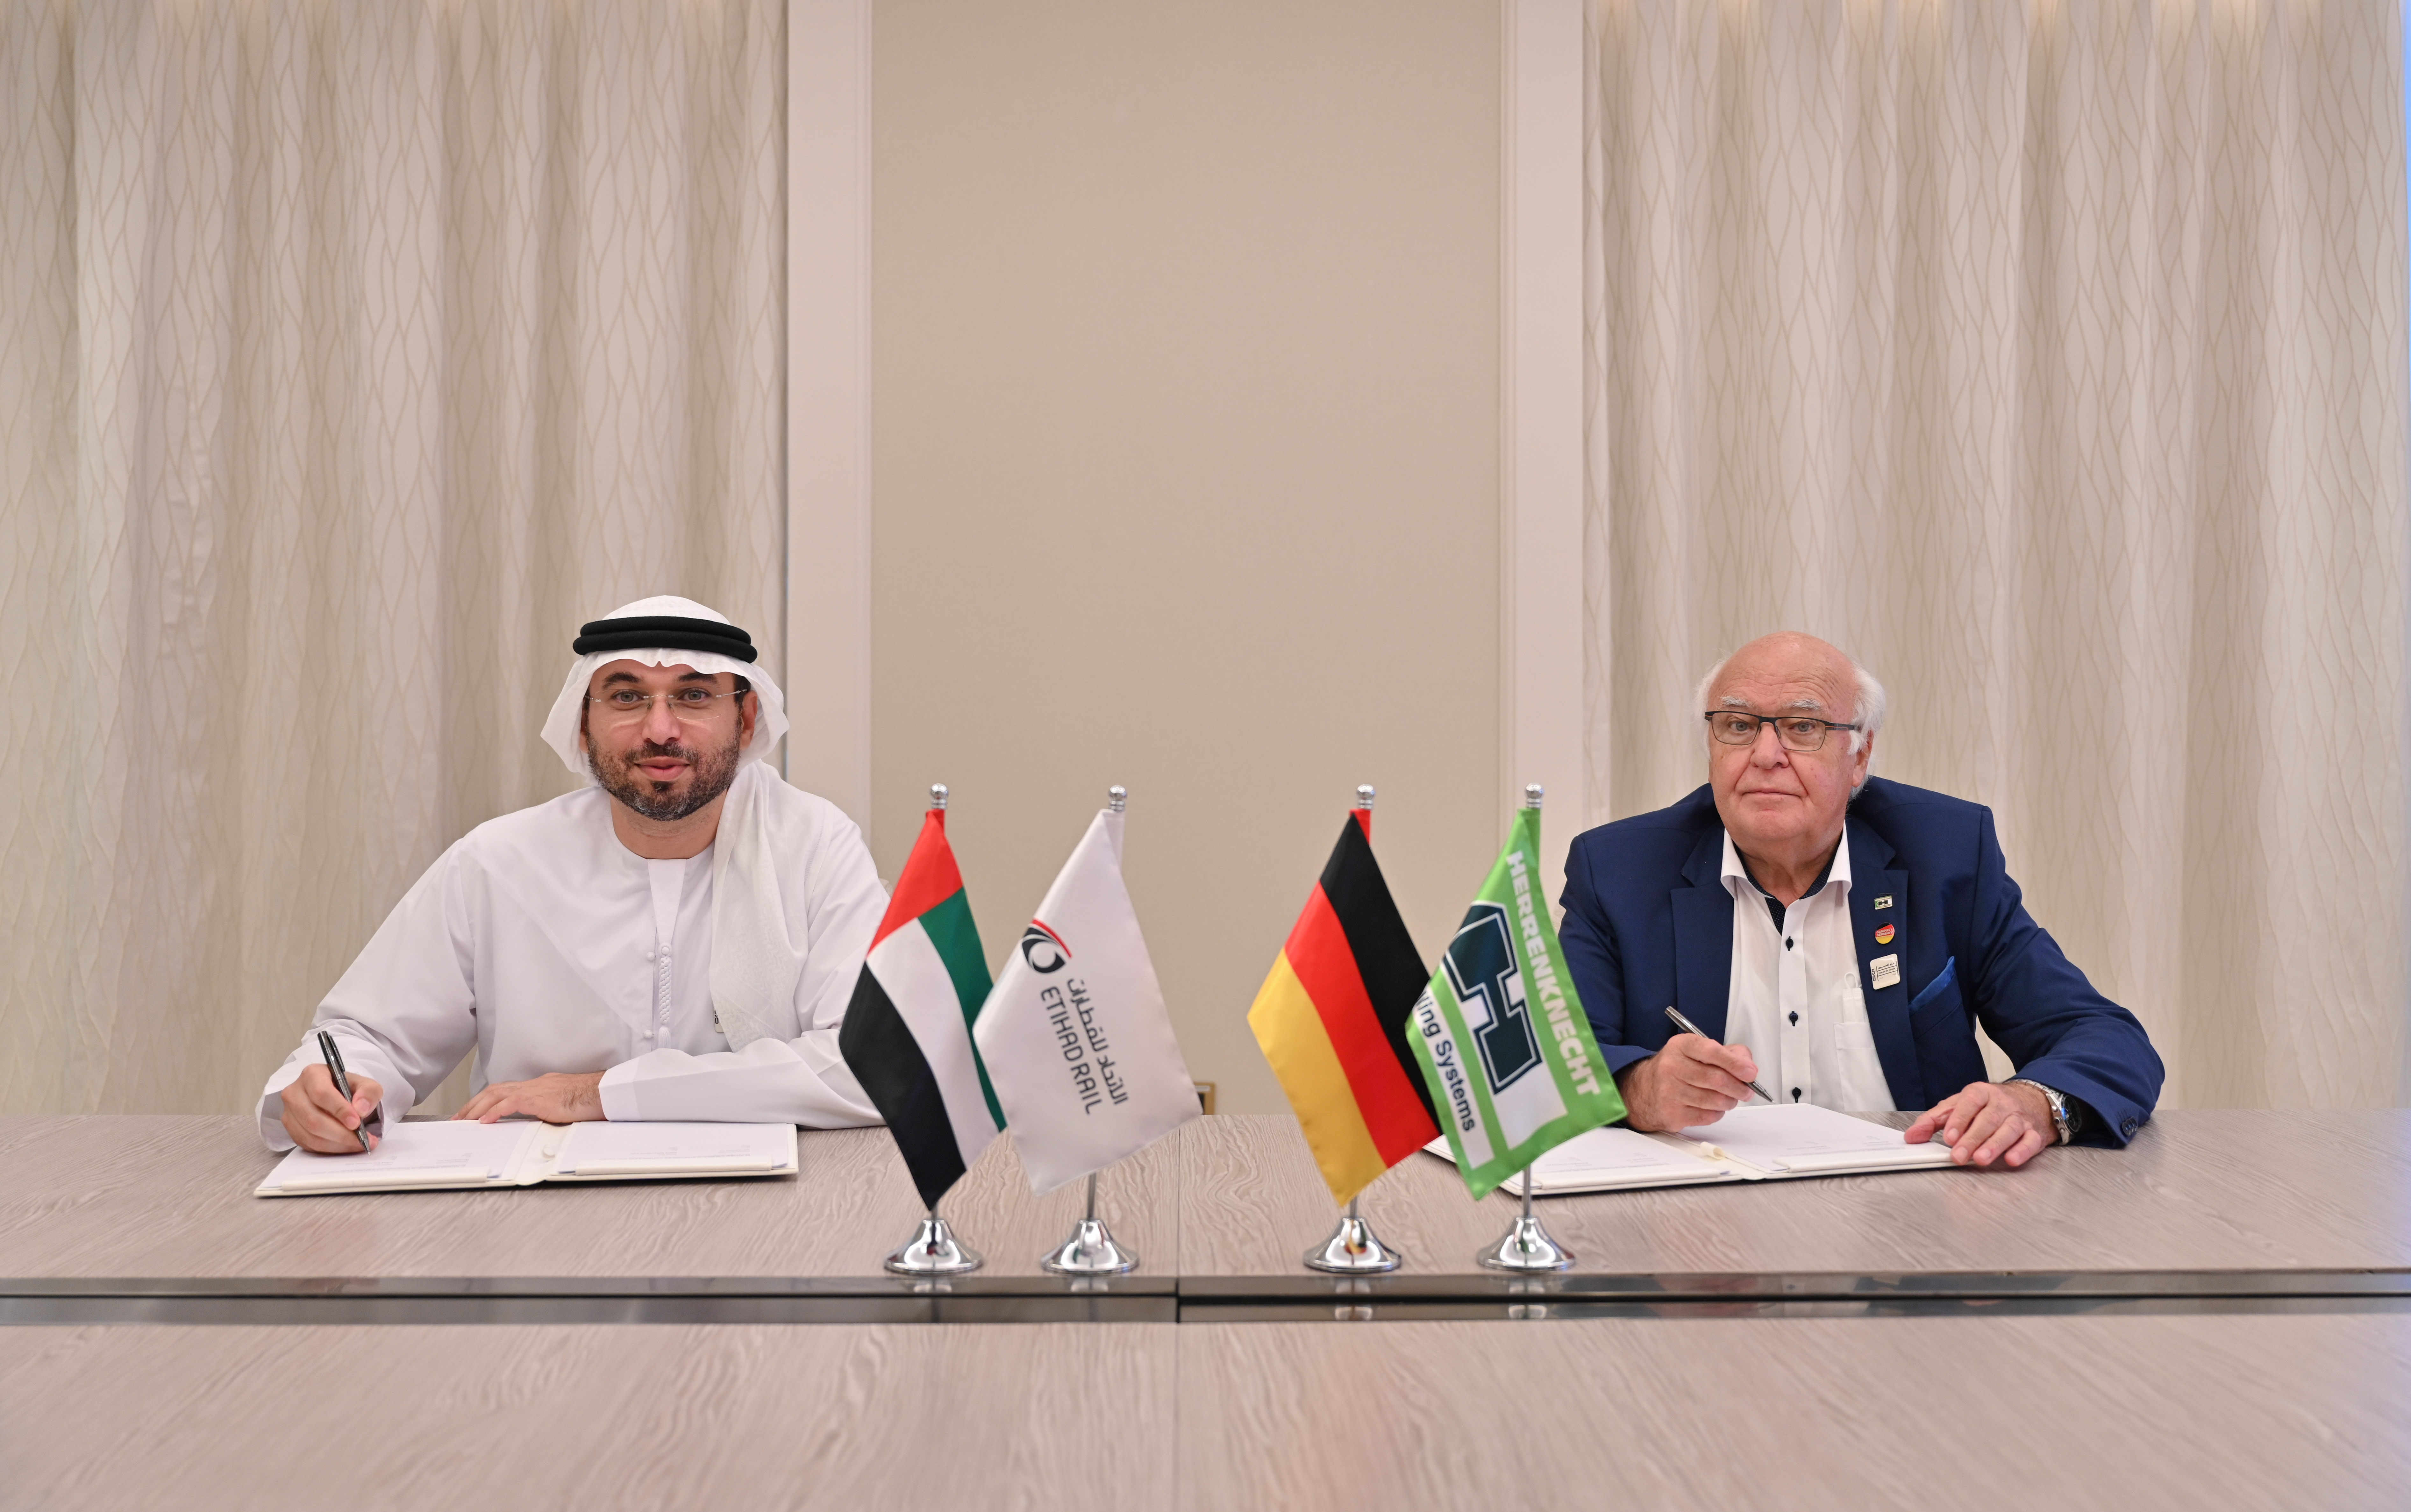 Etihad Rail Signs Strategic Agreement With Herrenknecht To Develop New Tunnel Design And Construction Technologies